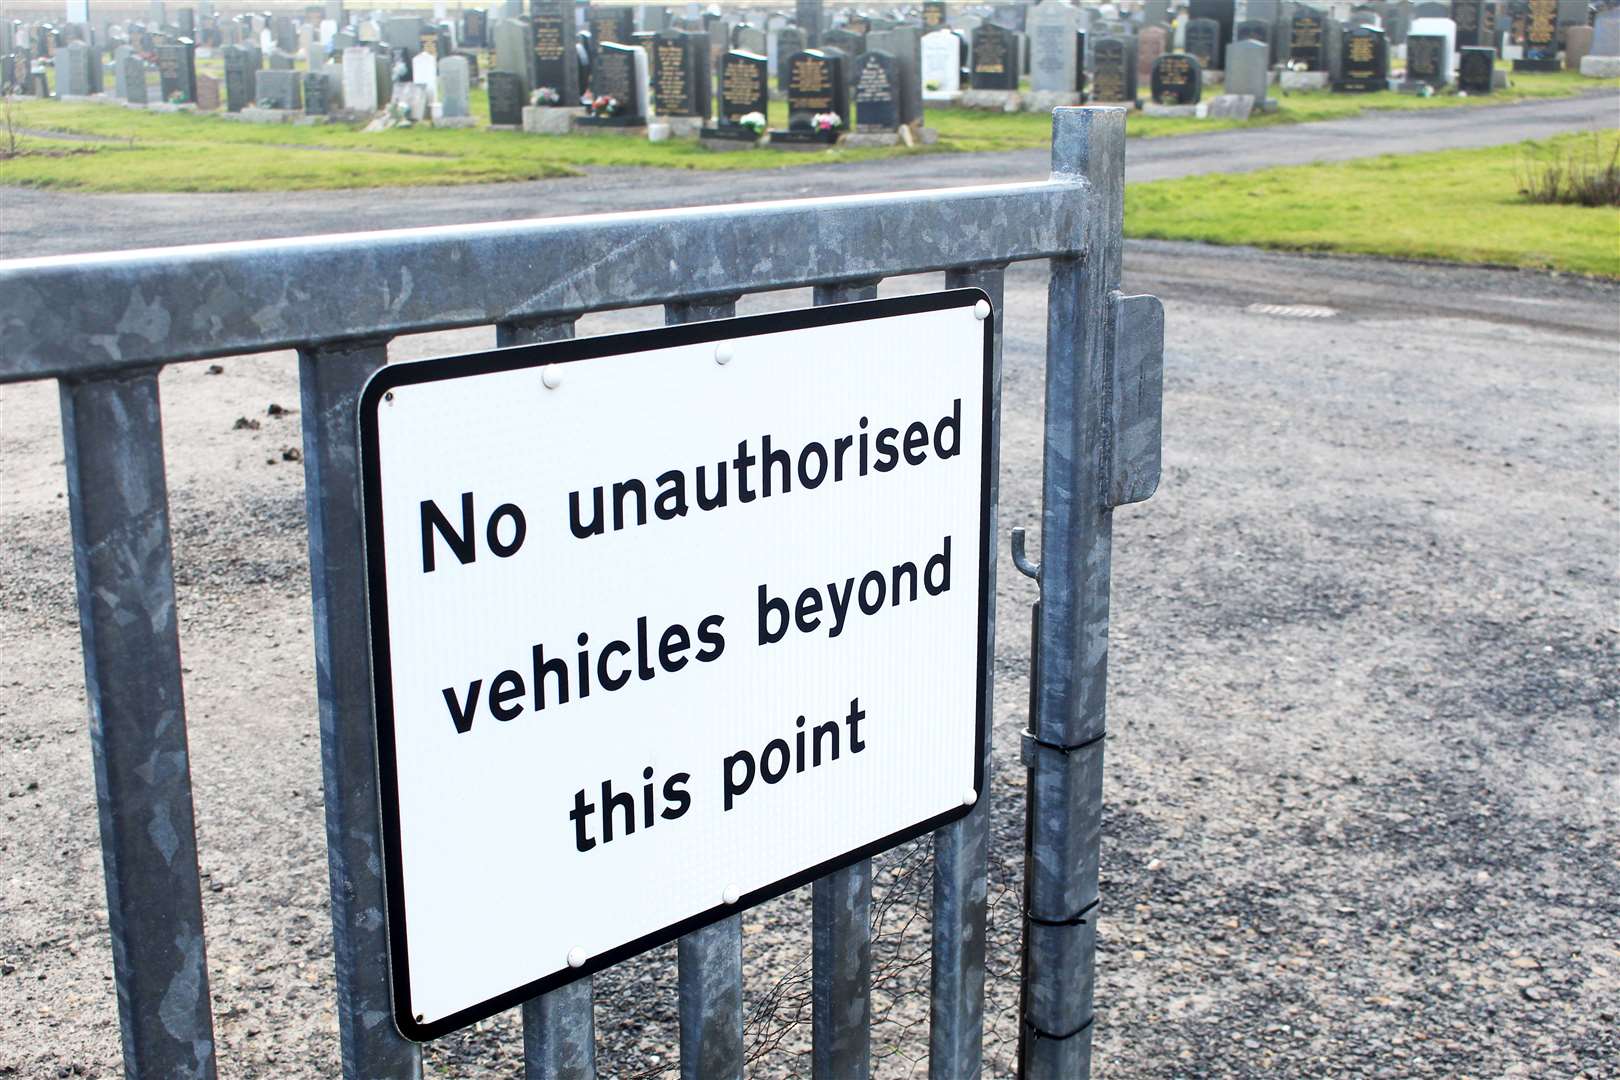 Cars have caused damage at Wick cemetery, according to Councillor Raymond Bremner.